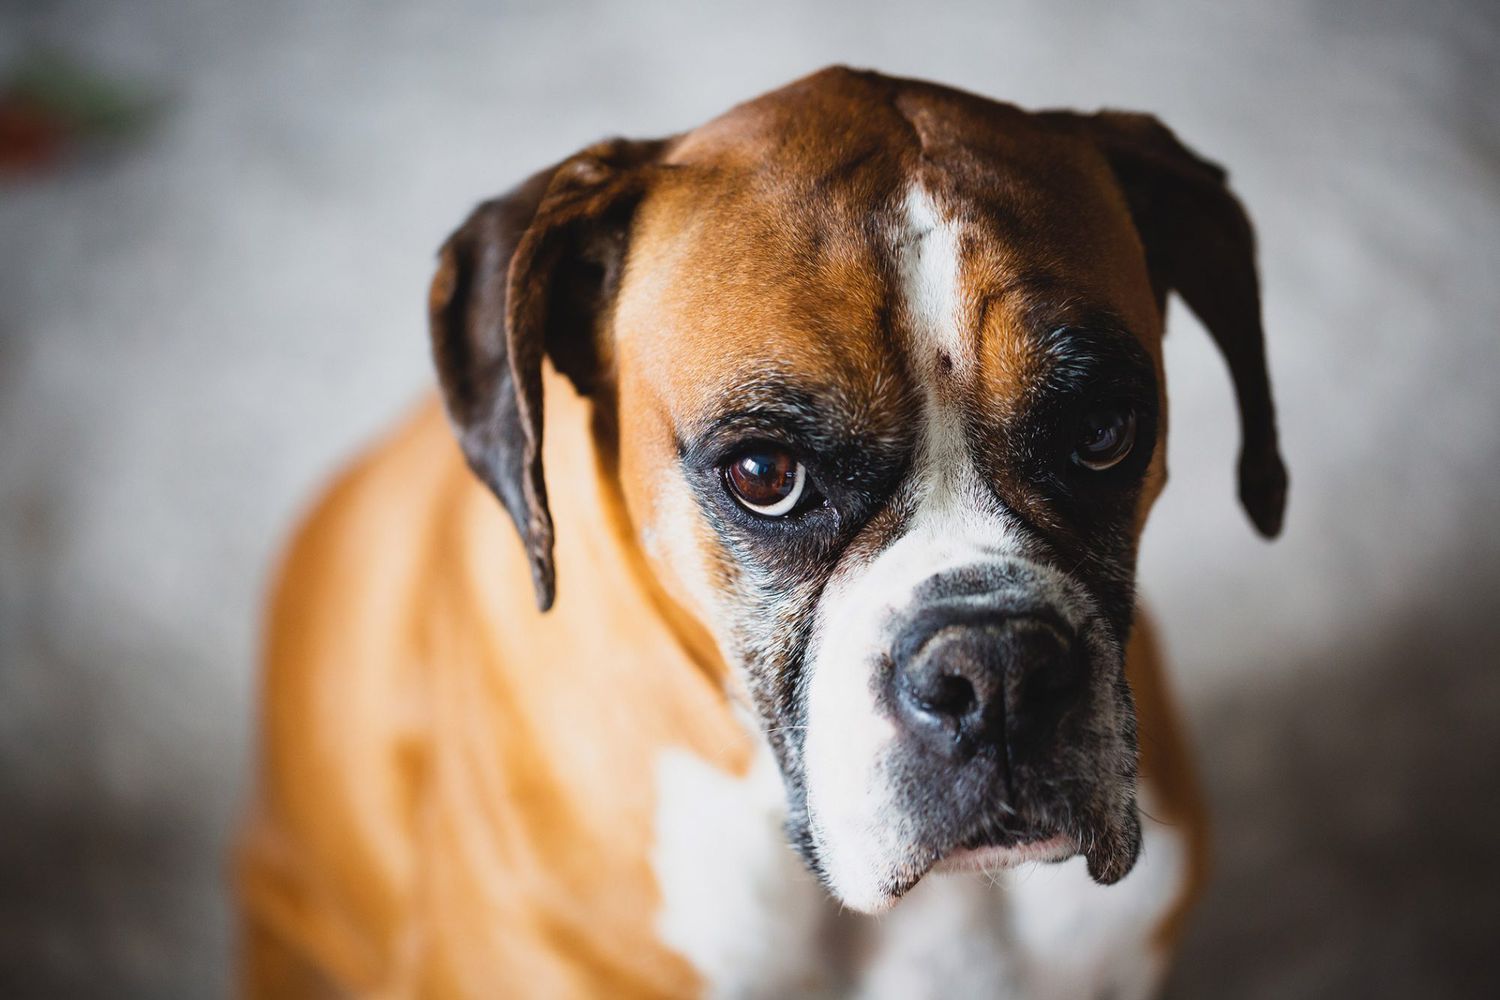 Is Your Dog at Risk of Bloat? Here’s What You Need to Know